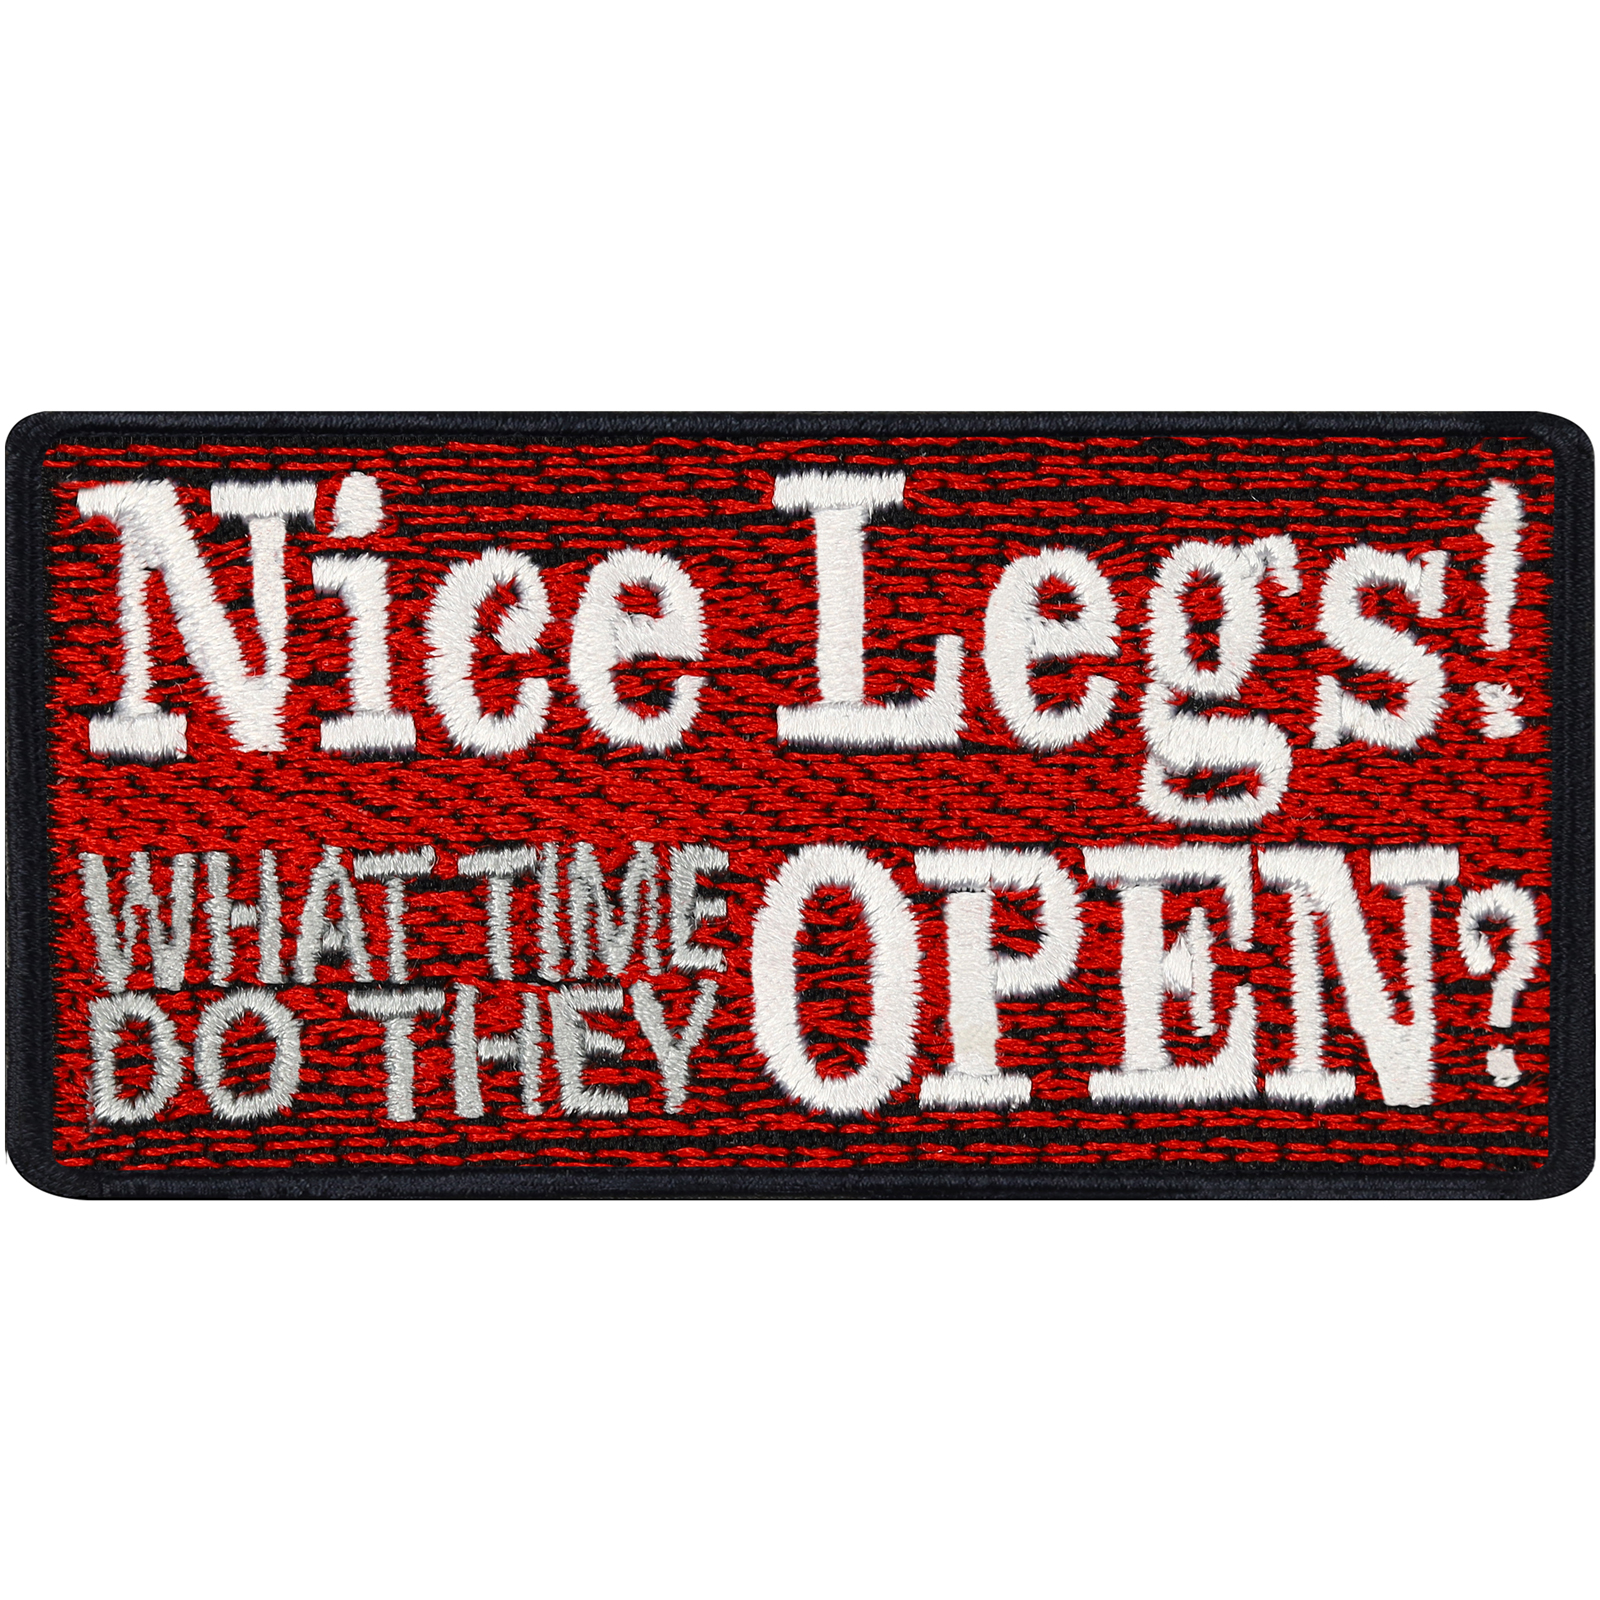 Nice Legs! What time do thy open? - Patch